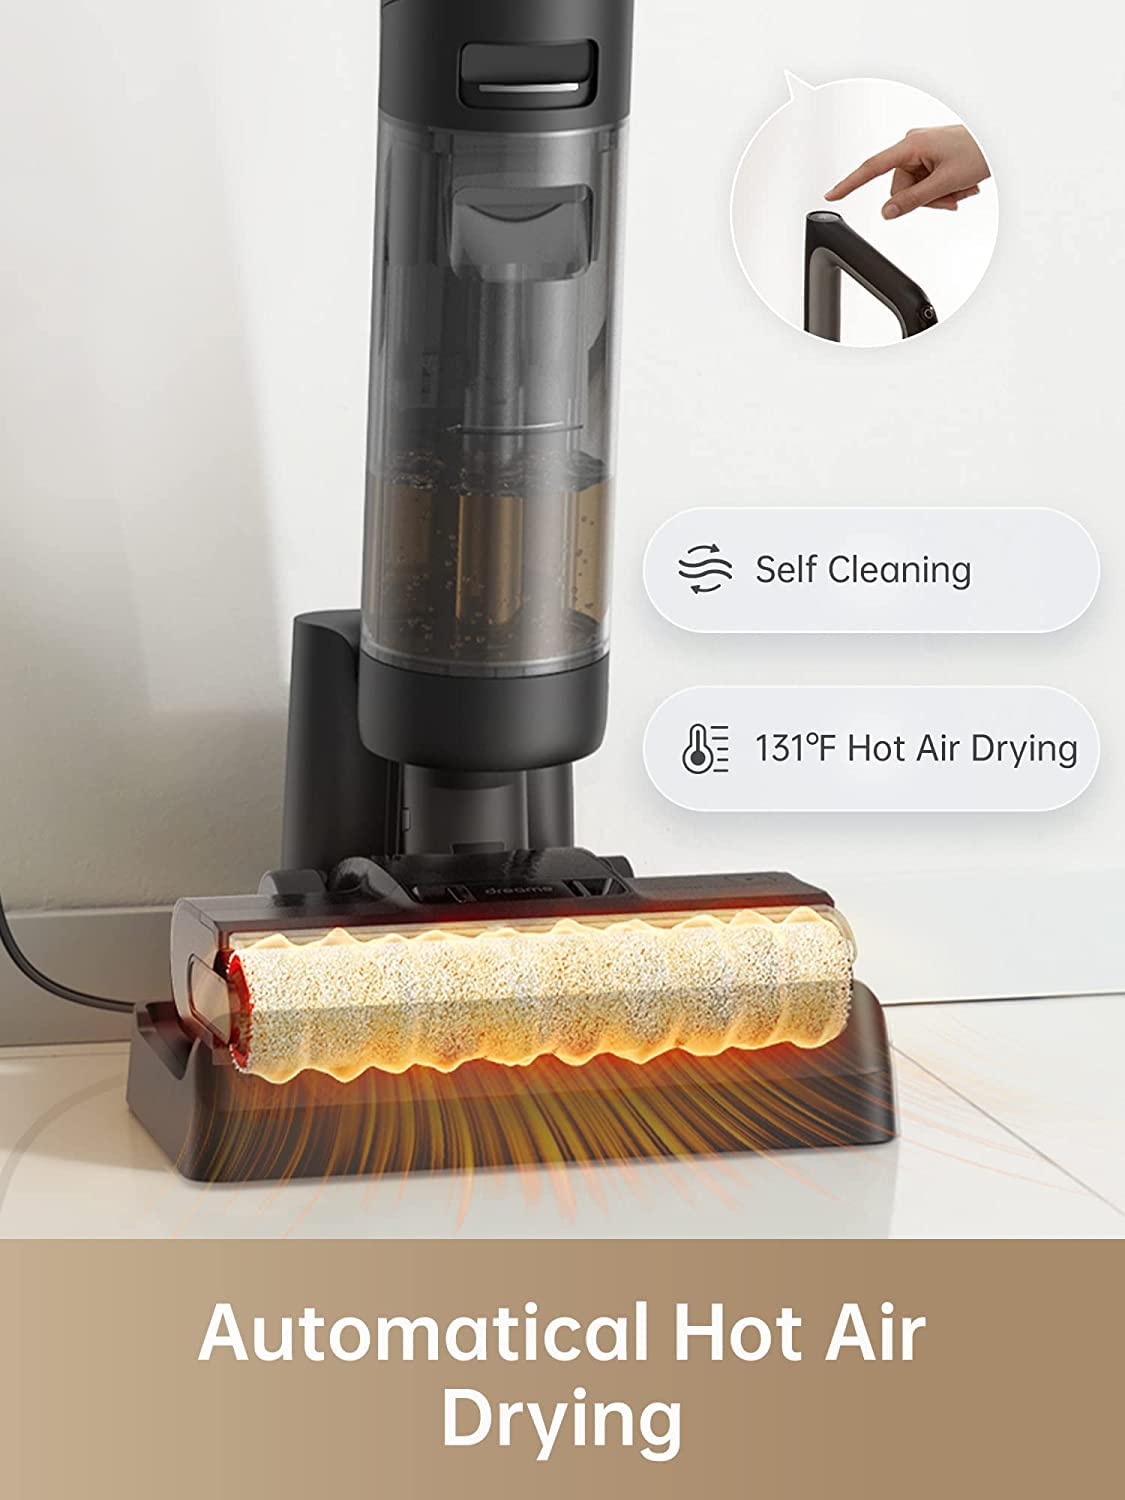 Dreametech H12 PRO Wet Dry Vacuum Cleaner, Smart Floor Cleaner Cordless Vacuum and Mop for Hard Floors, One-Step Edge to Edge Cleaning with Hot Air Drying